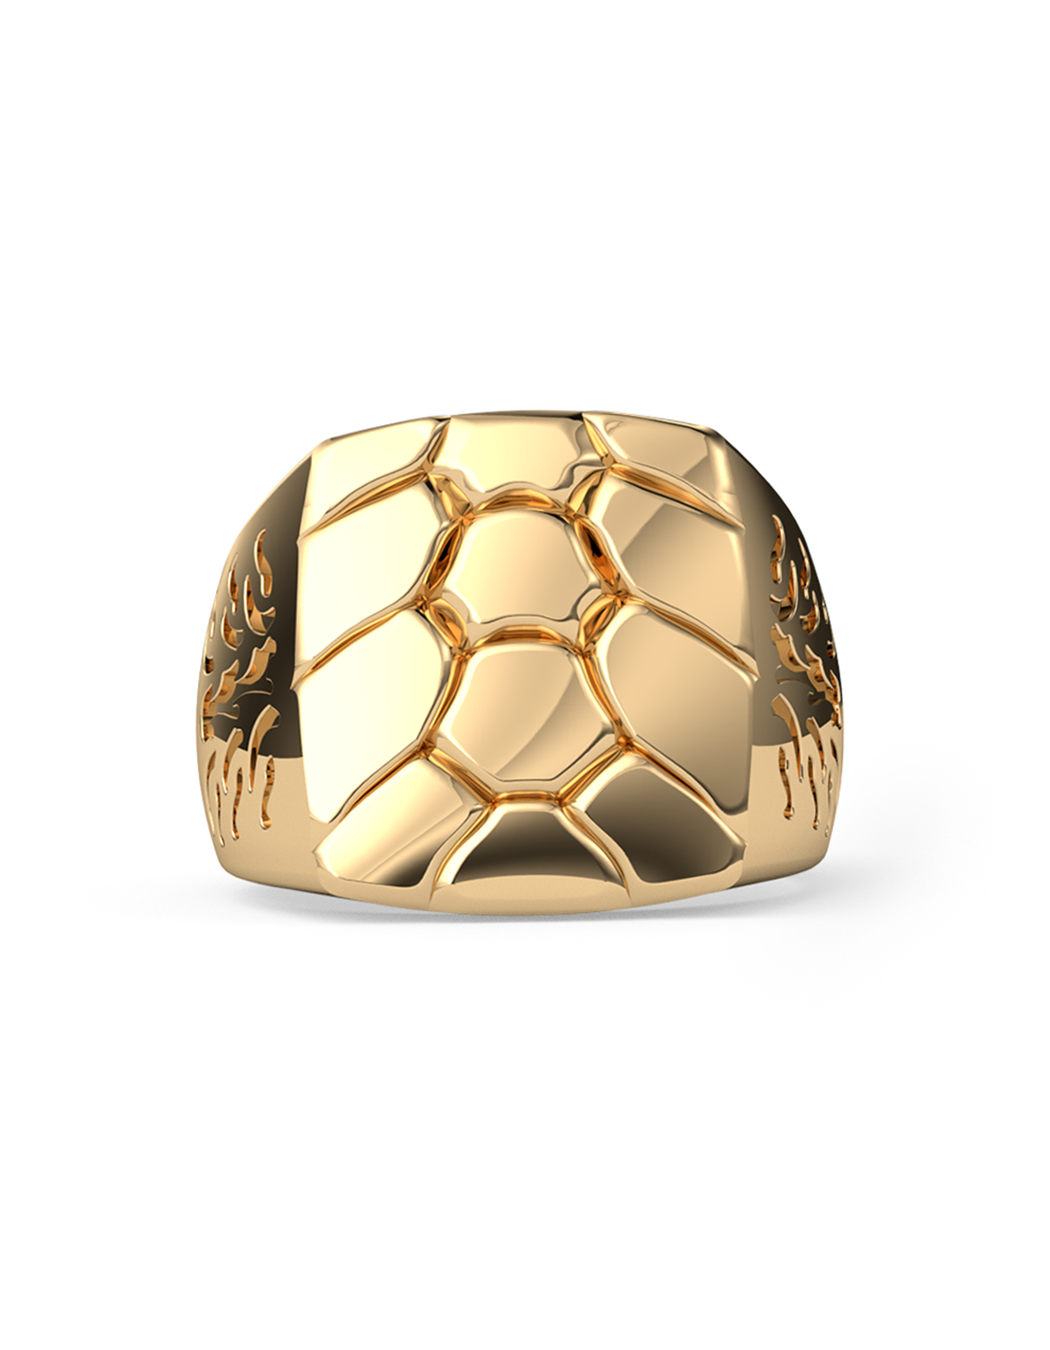 Ridley Sea Turtle Ring 14k Gold